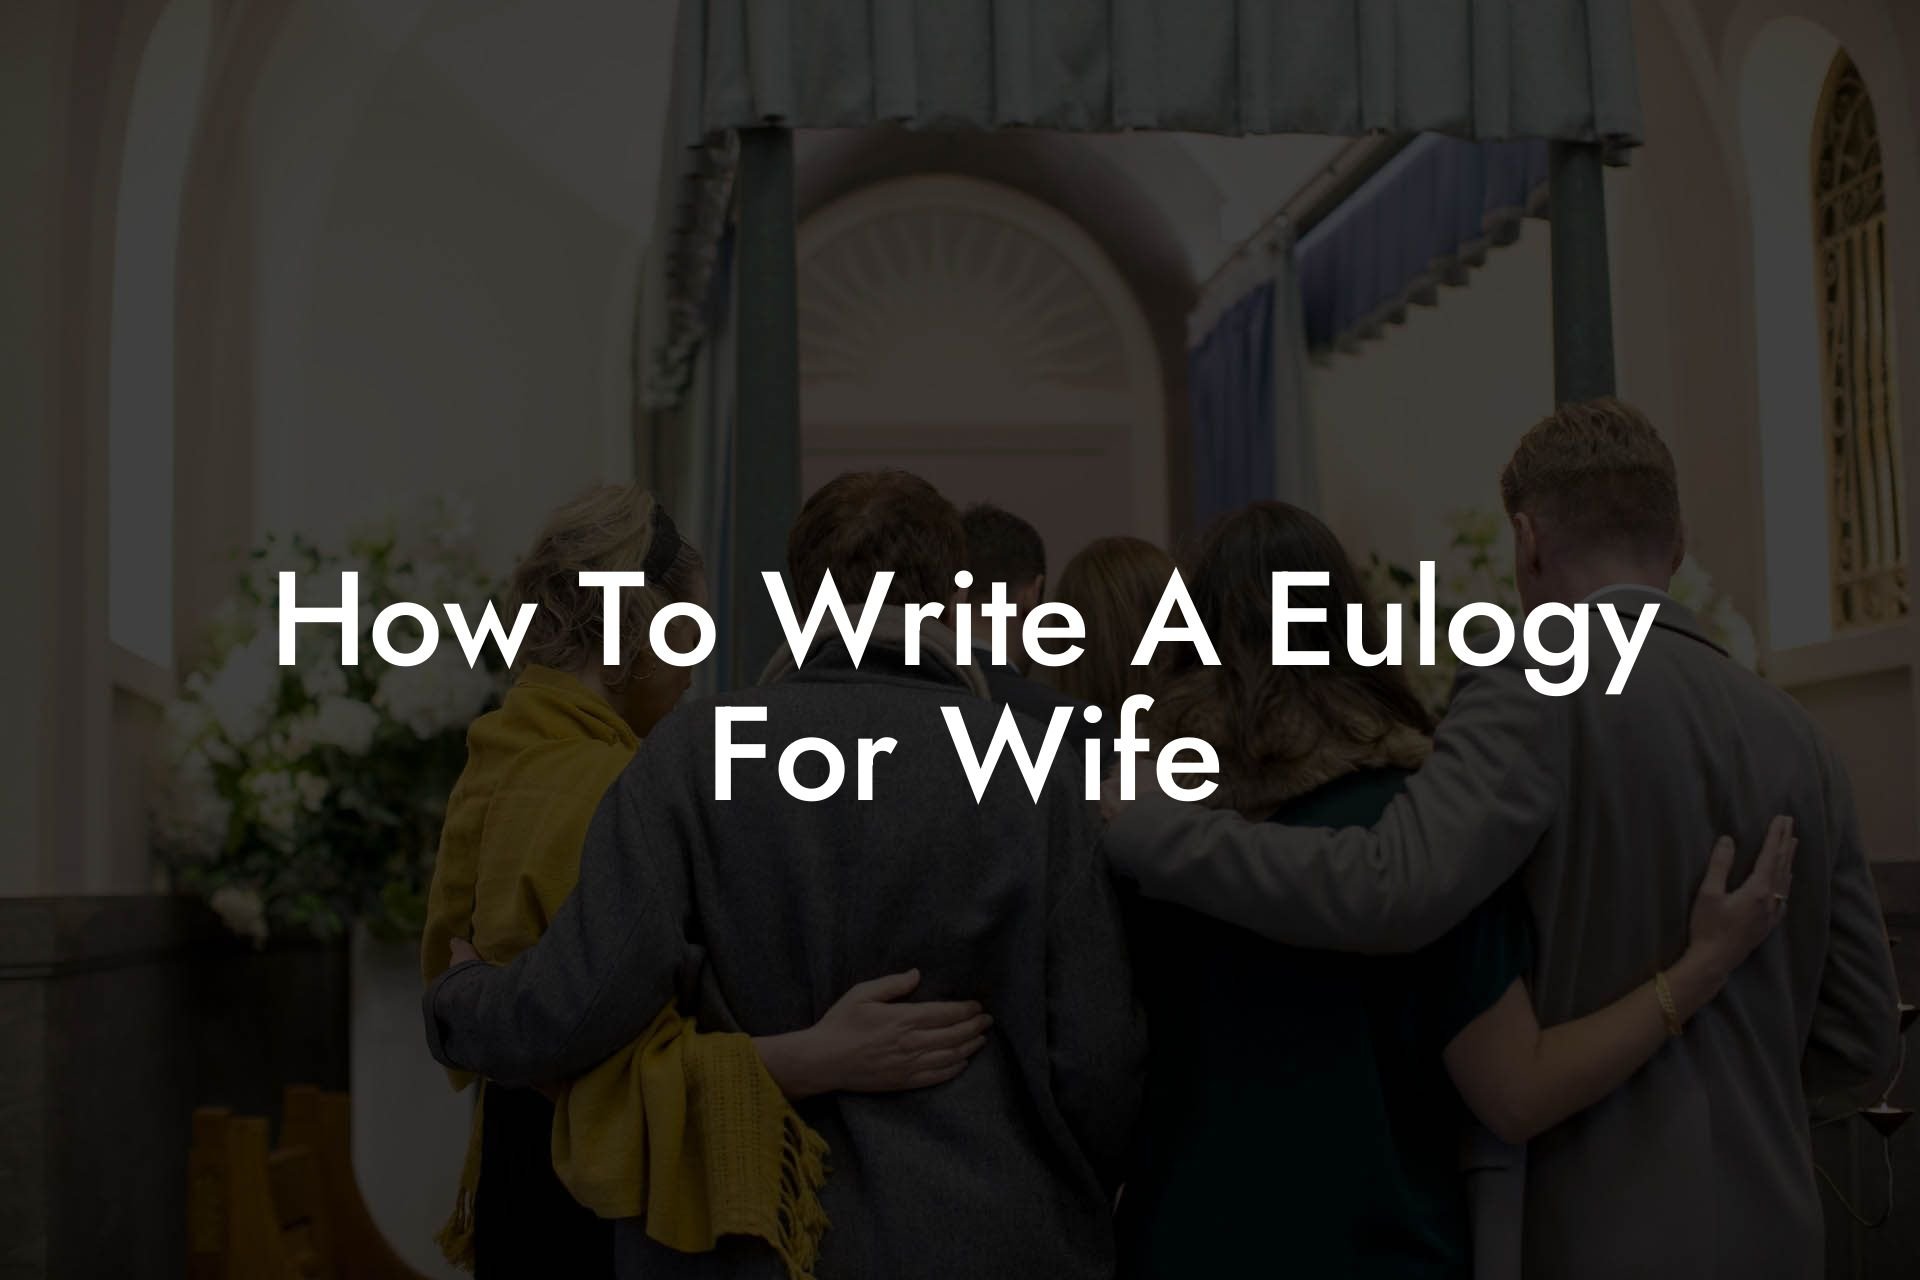 How To Write A Eulogy For Wife